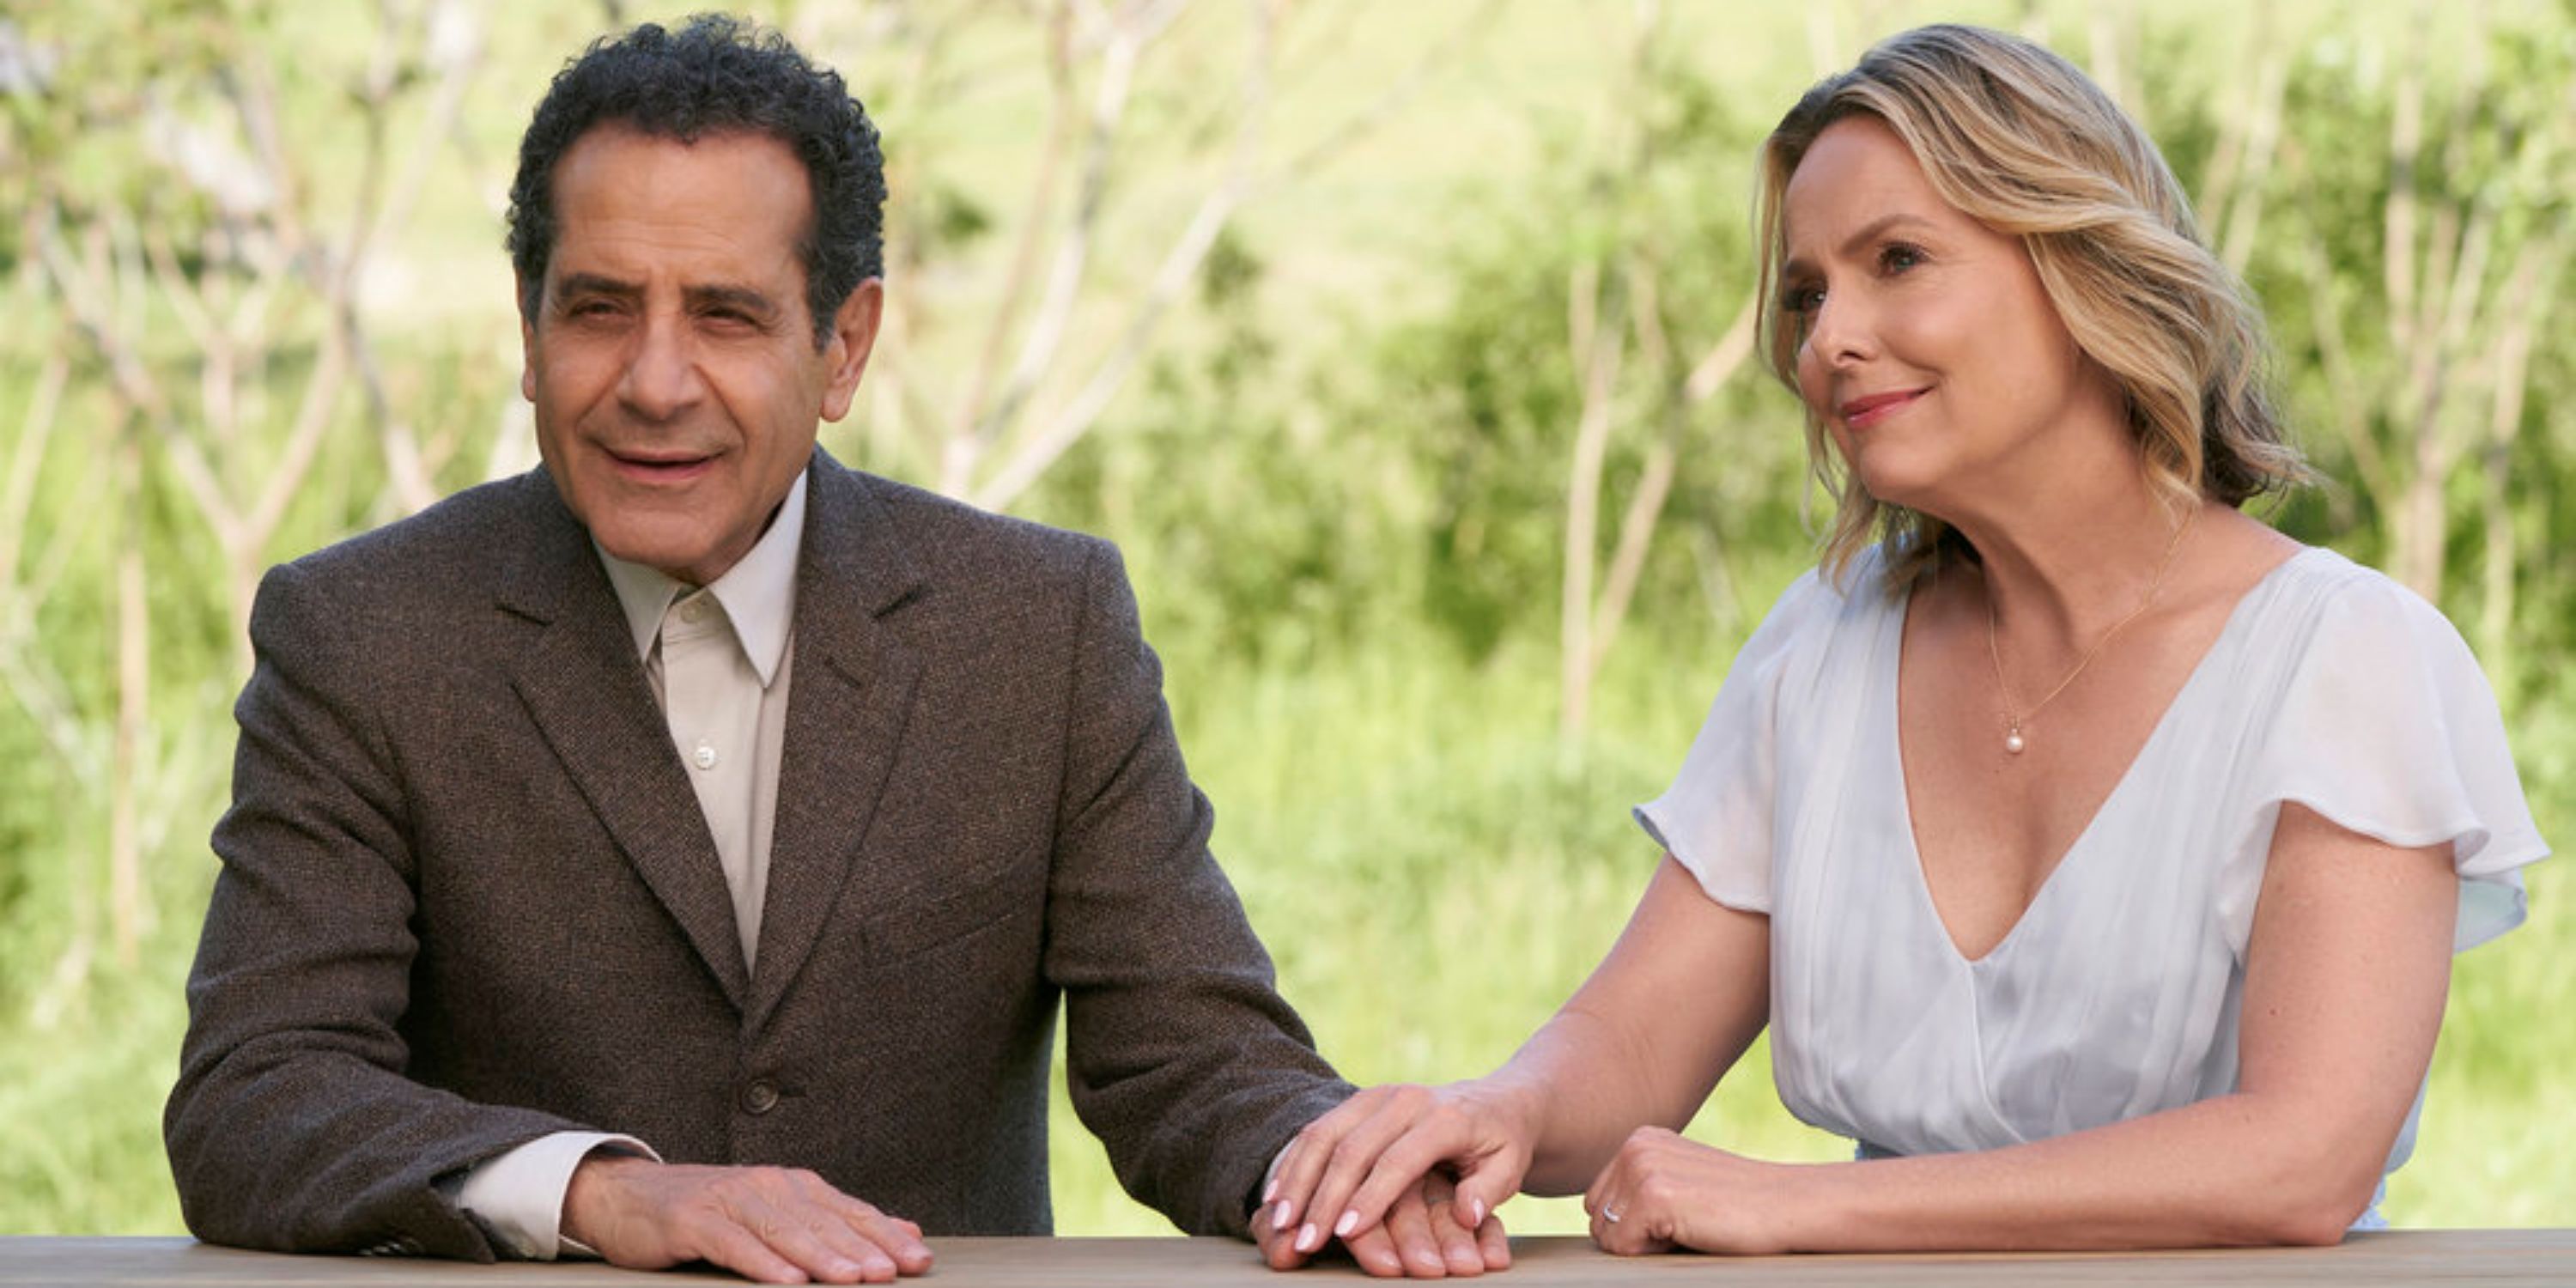 Tony Shalhoub as Adrian Monk and Melora Hardin as Trudy Monk in Mr. Monk's Last Case: A Monk Movie